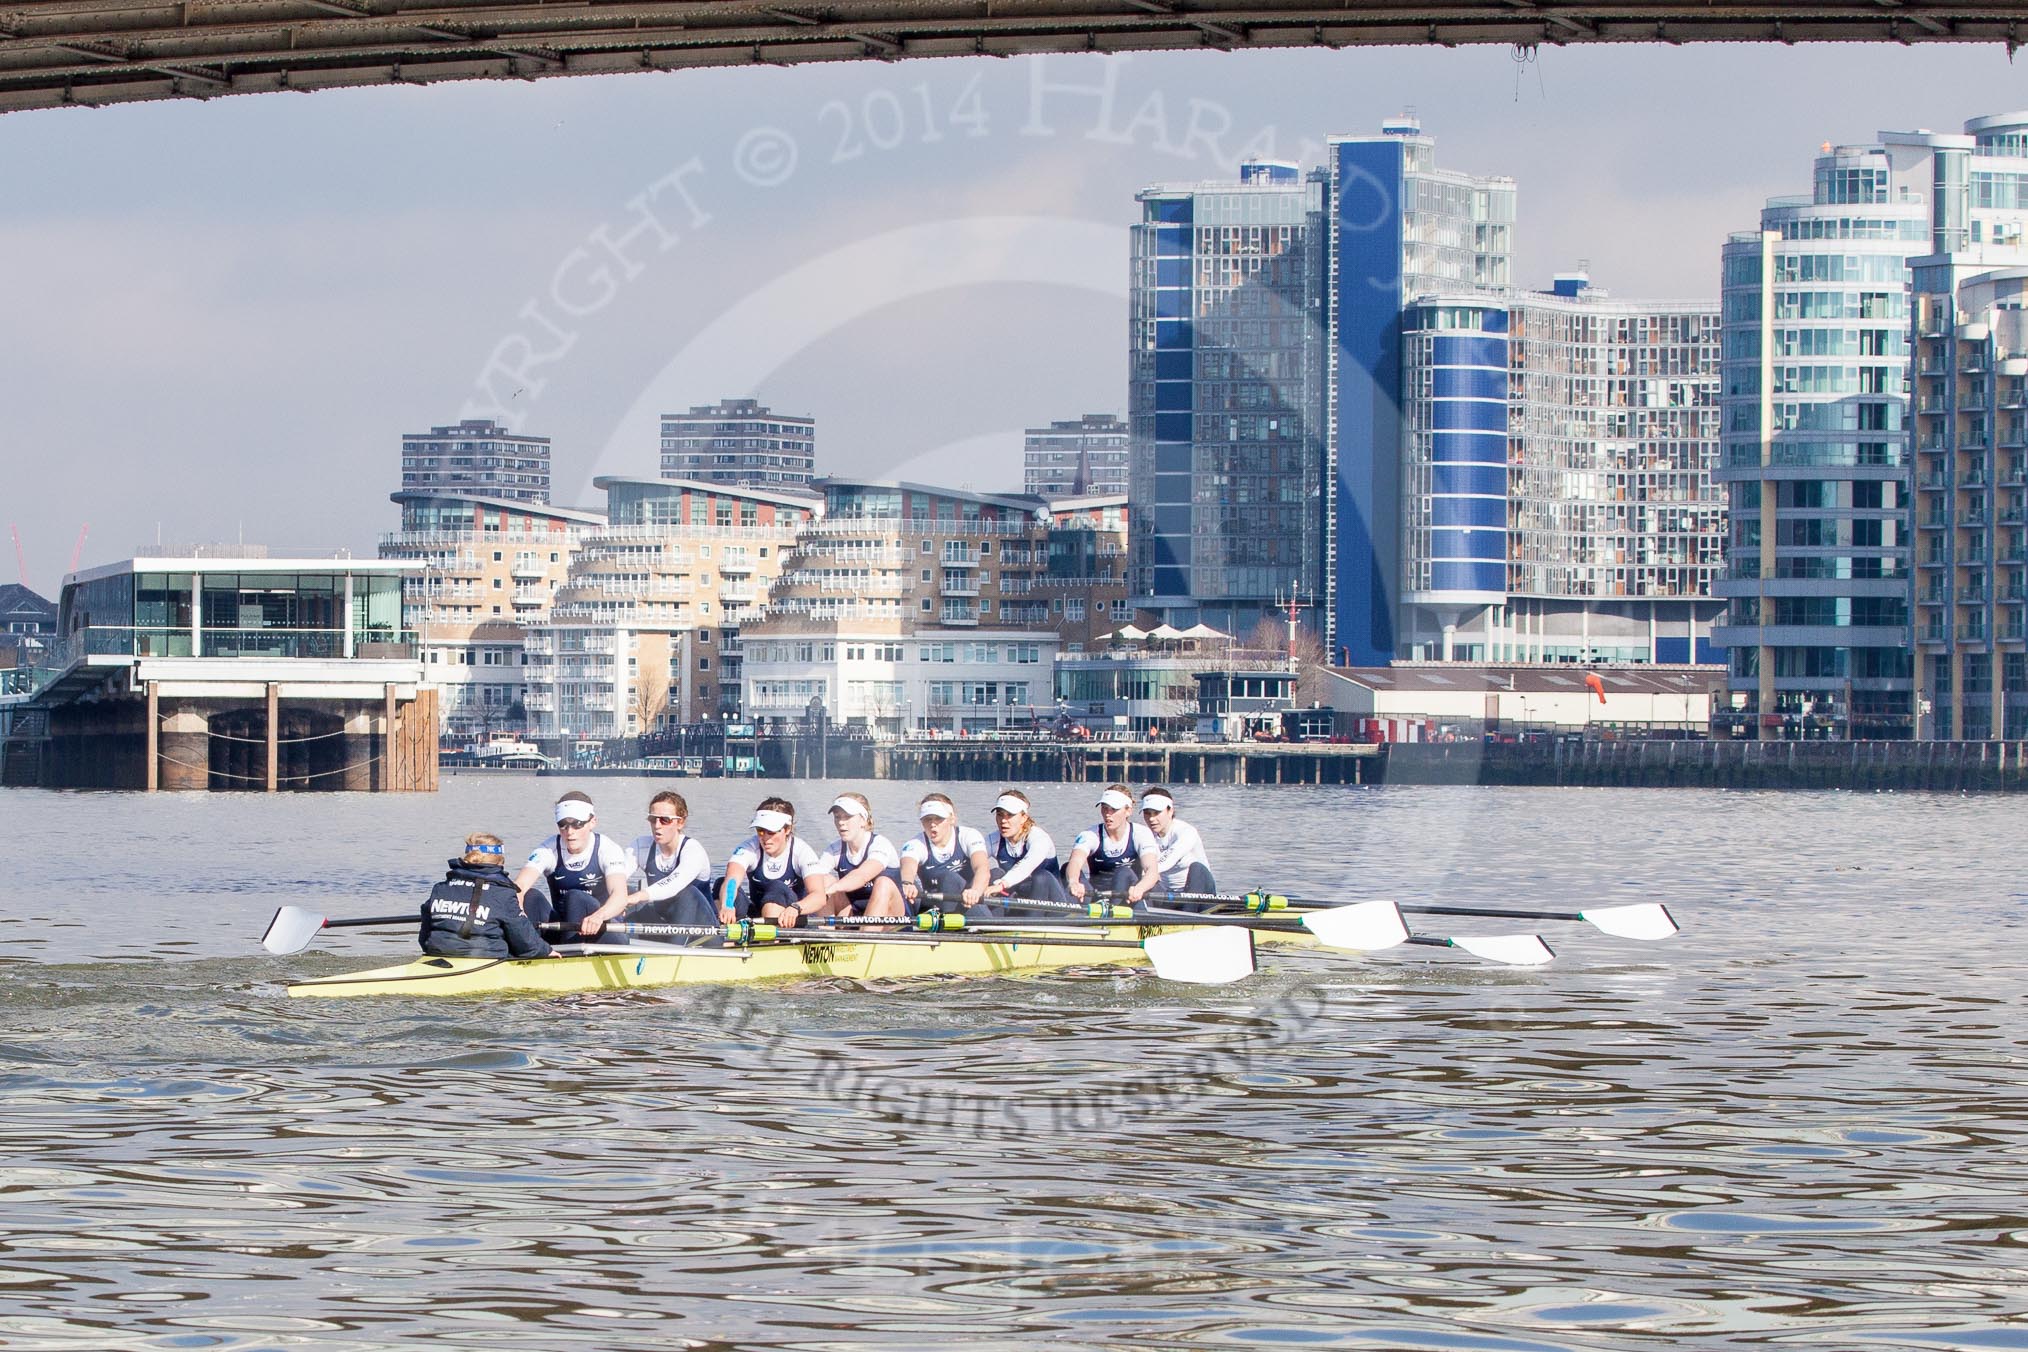 The Boat Race season 2014 - fixture OUWBC vs Molesey BC.




on 01 March 2014 at 13:10, image #193